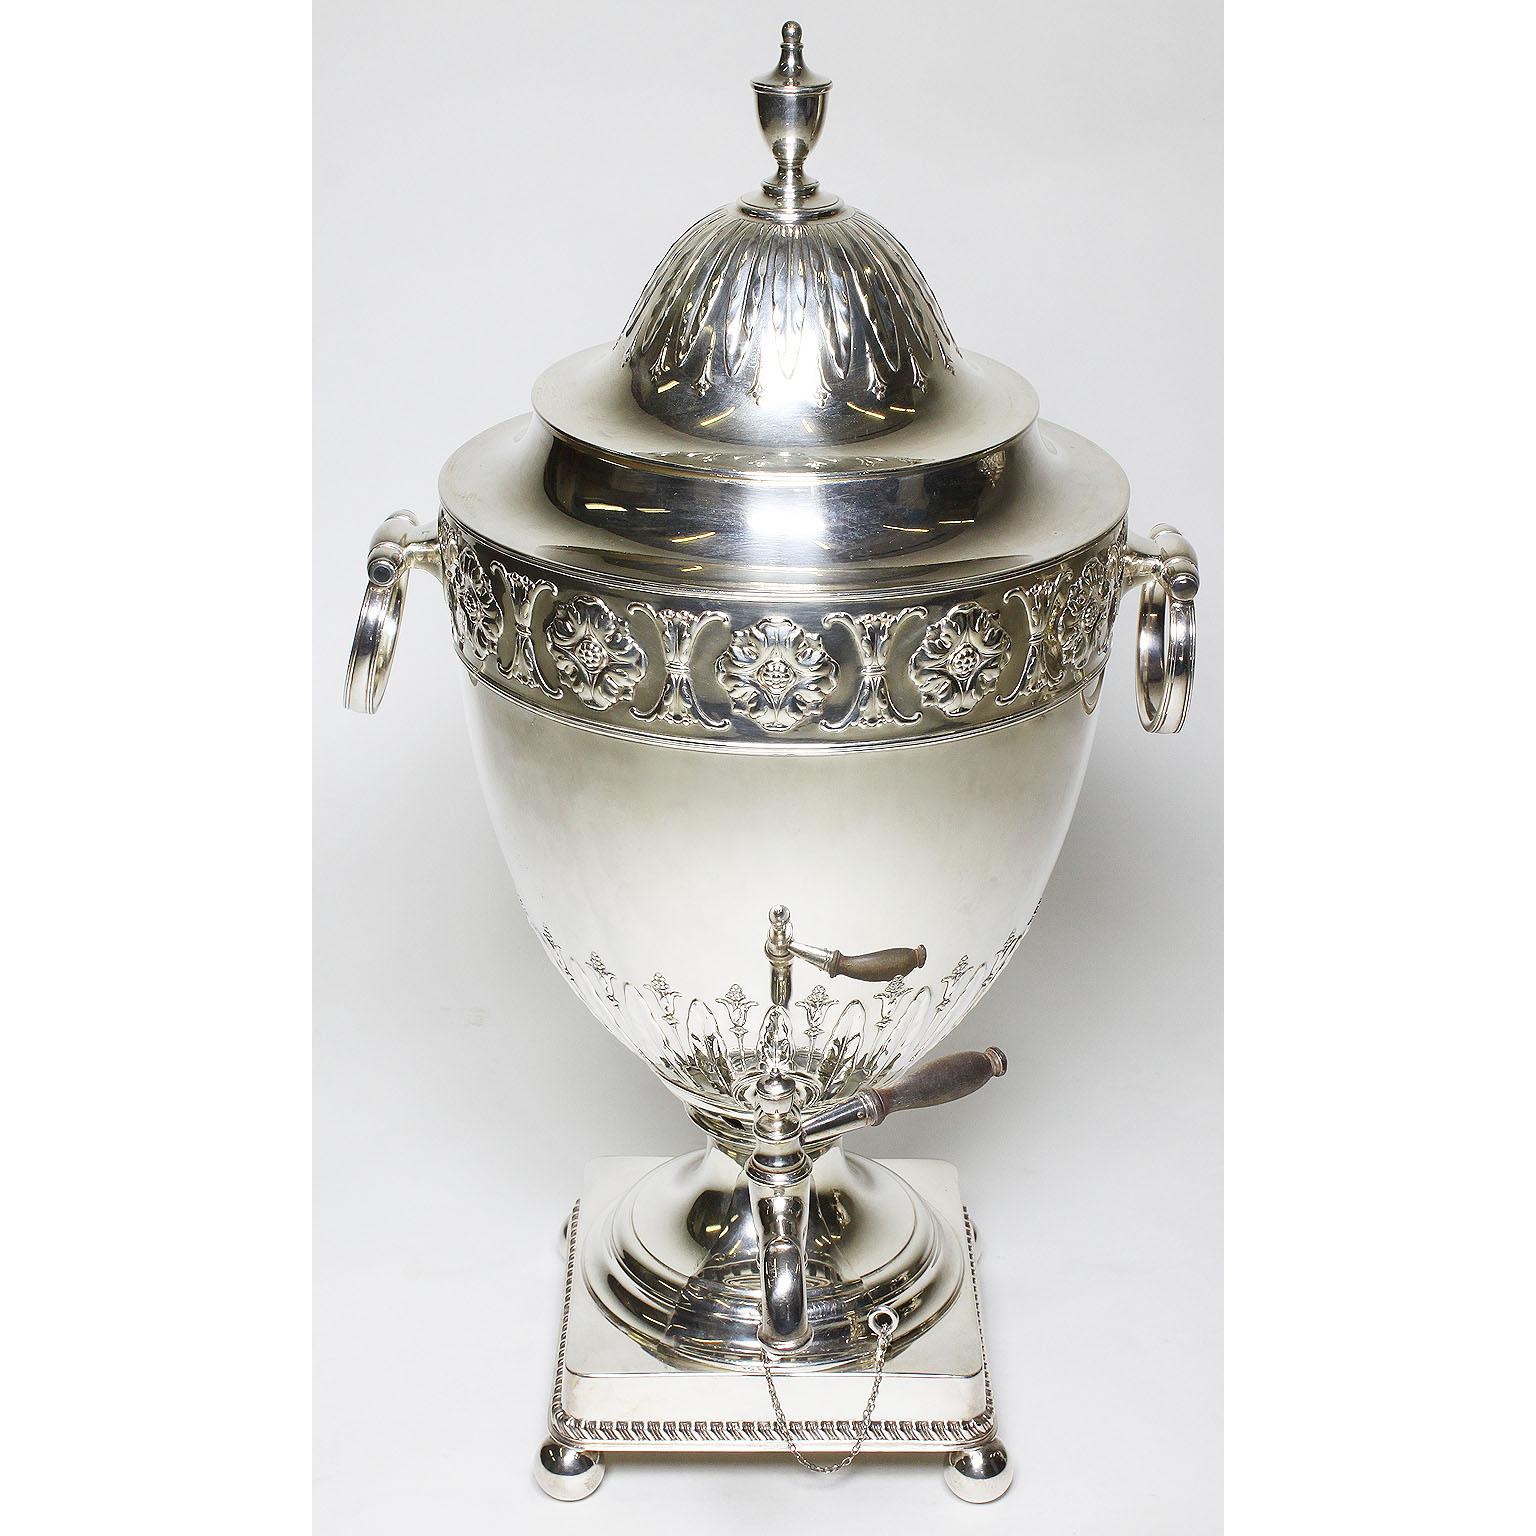 A fine and large pair of English 19th century George III style plated hot water-tea Samovars, each urn-form finely chased with a floral design reservoir with side ring-shaped handles, surmounted by a domed cover and raised on square base and ball